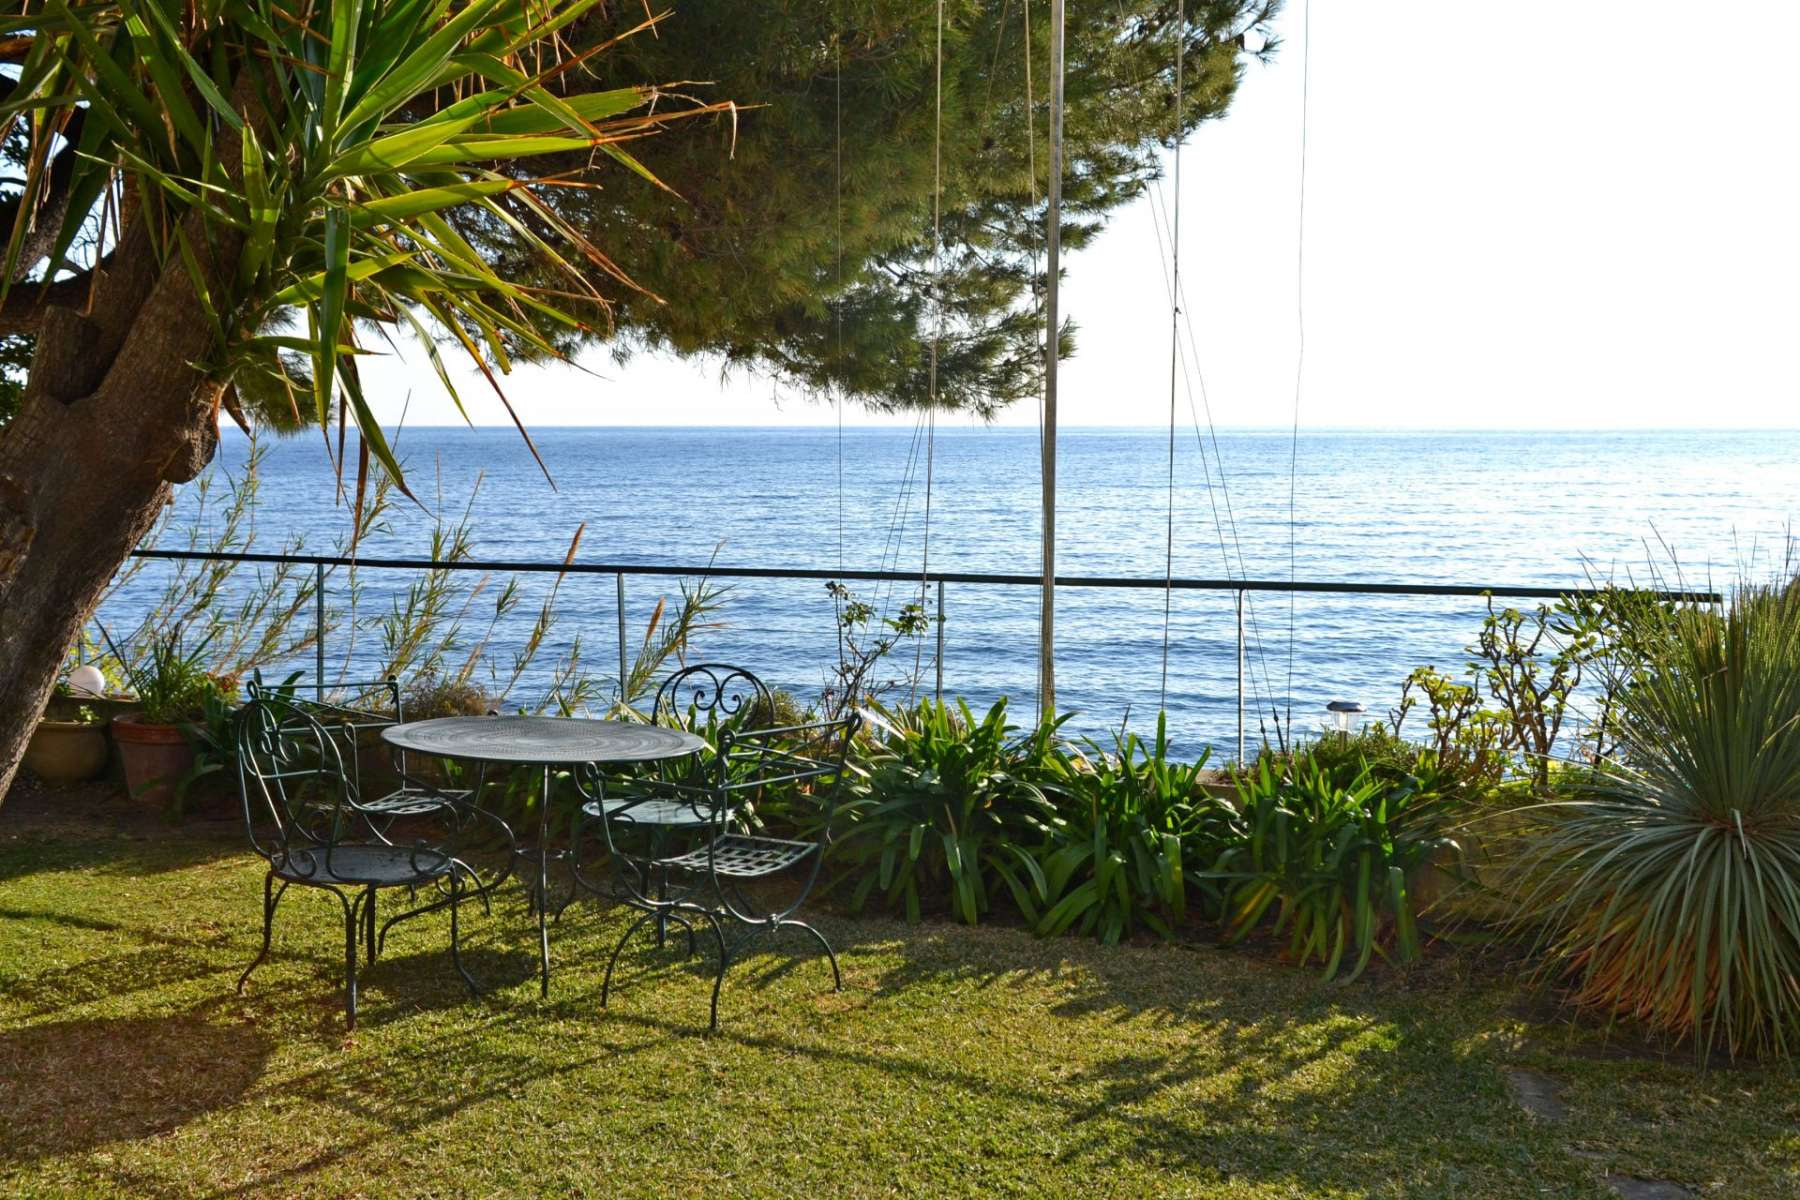 Villa for rent in Beaulieu-sur-Mer with an access to the beach